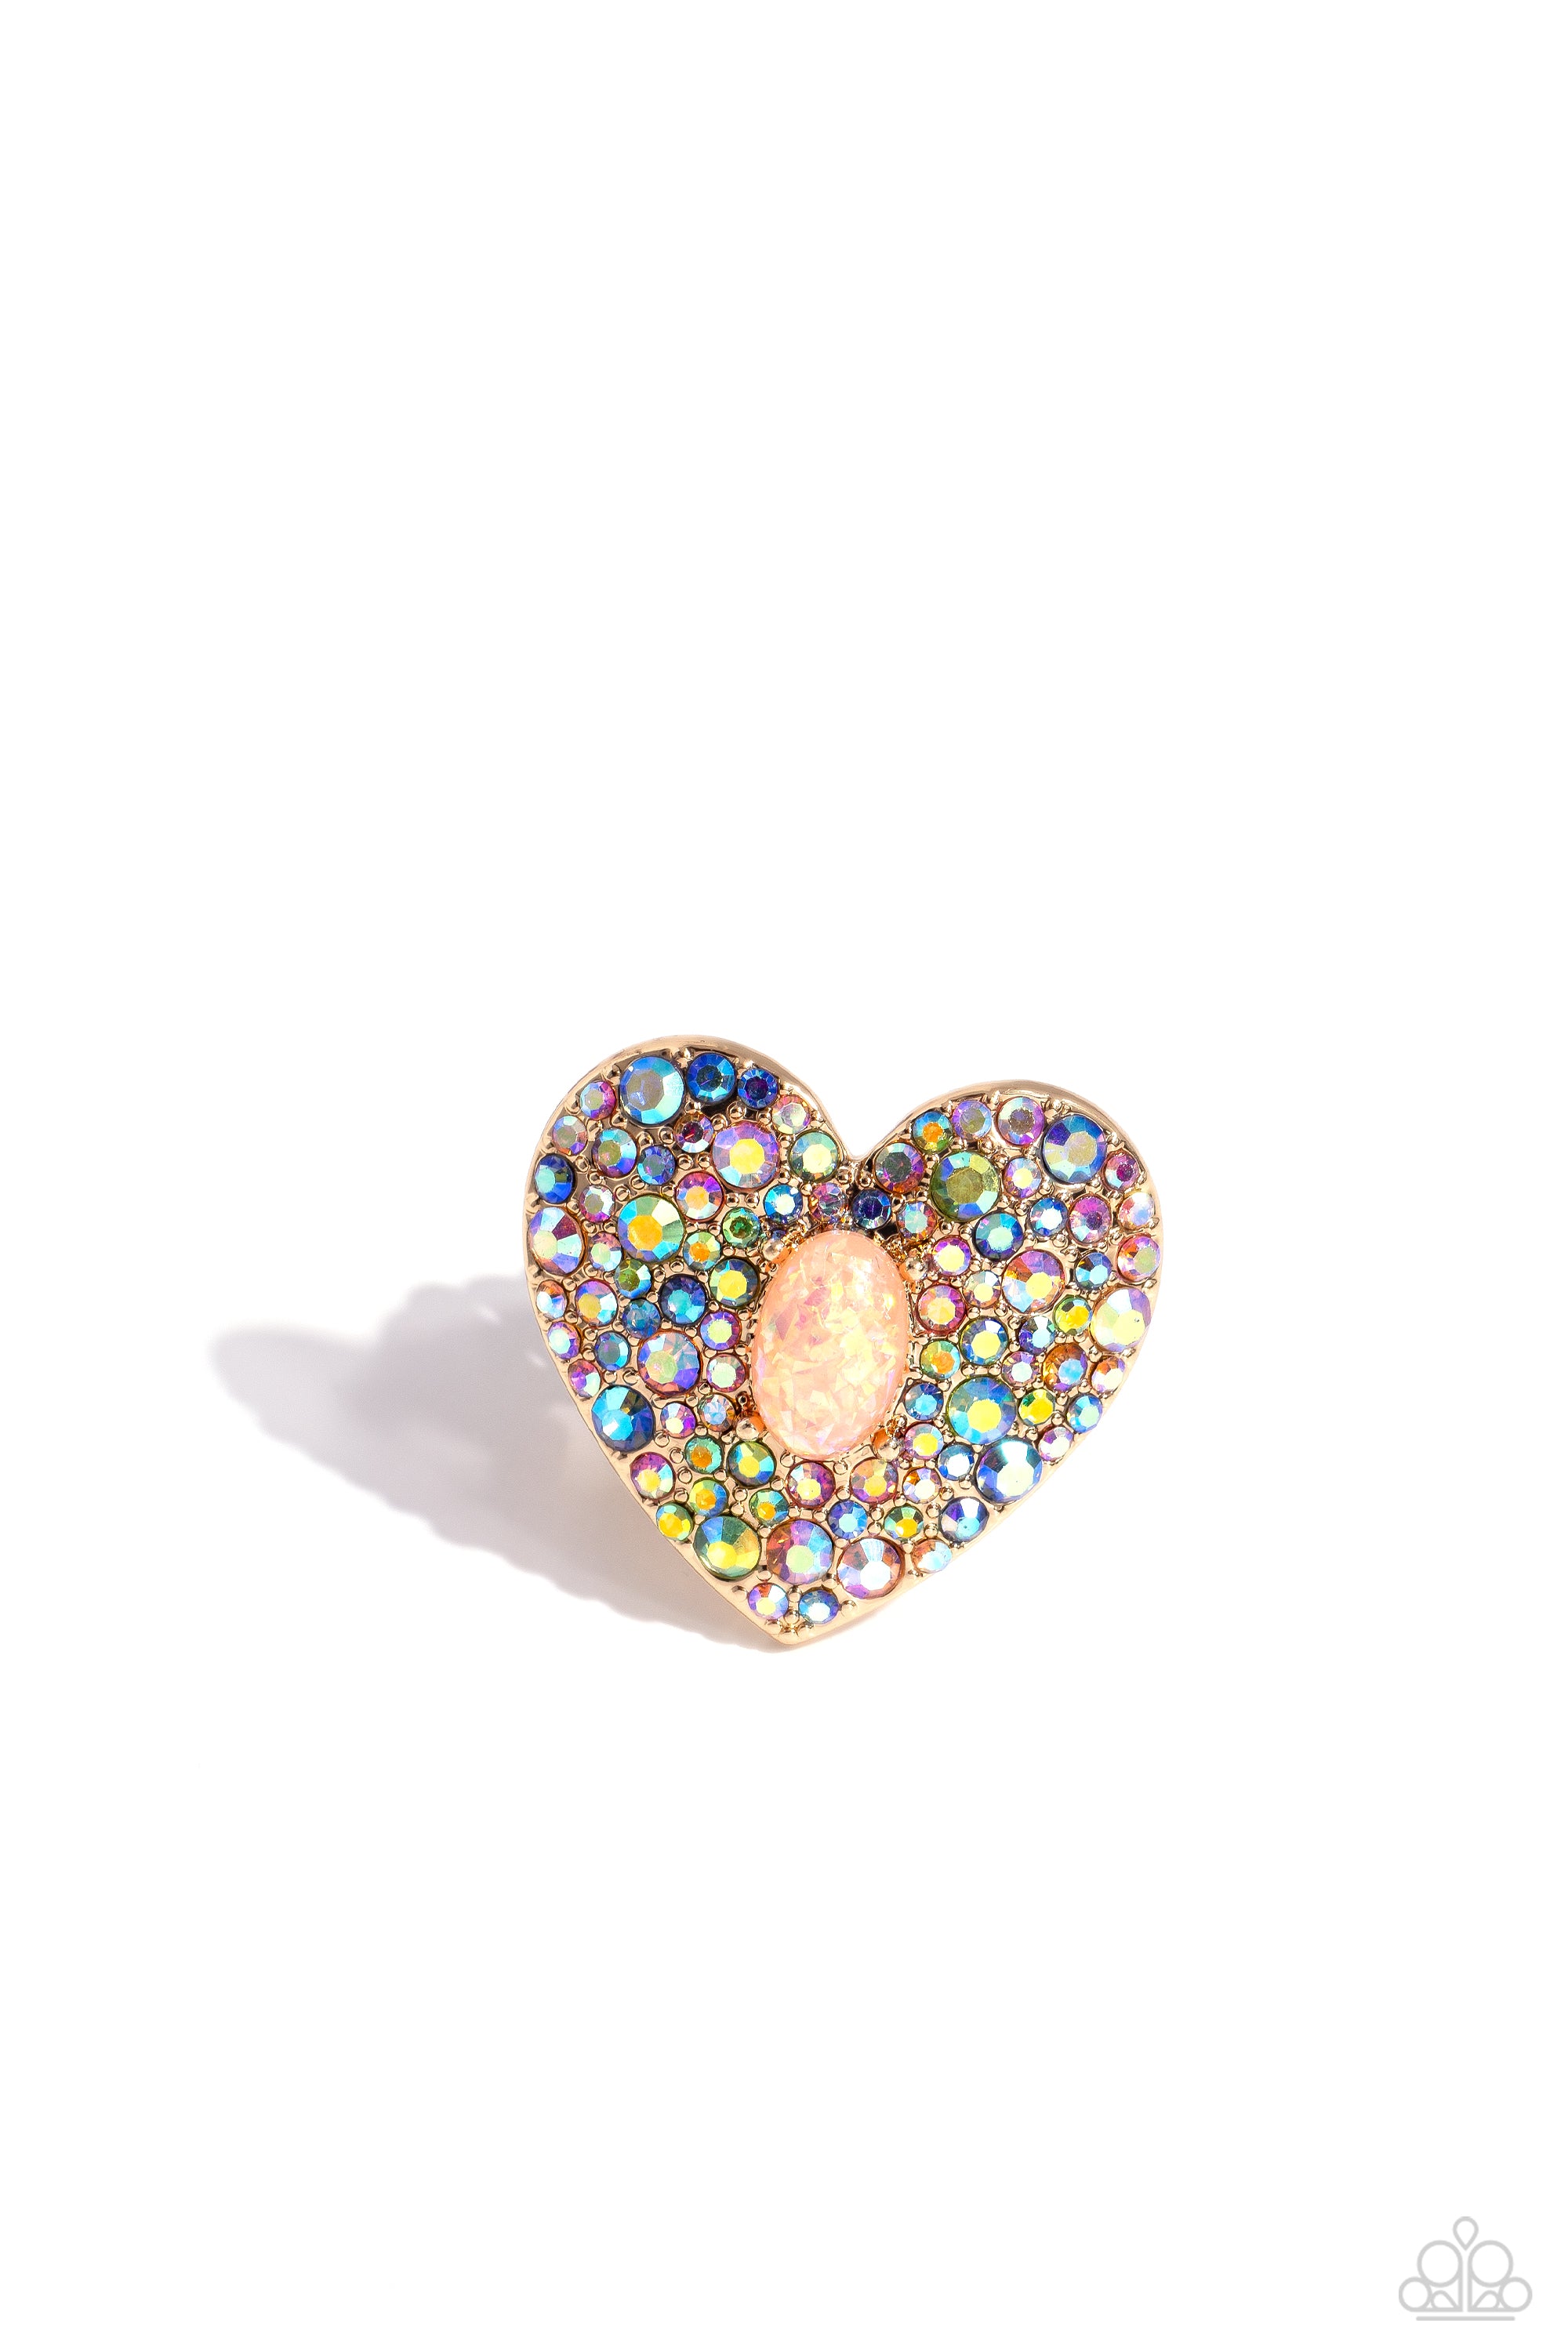 BEJEWELED BEAU GOLD-RING